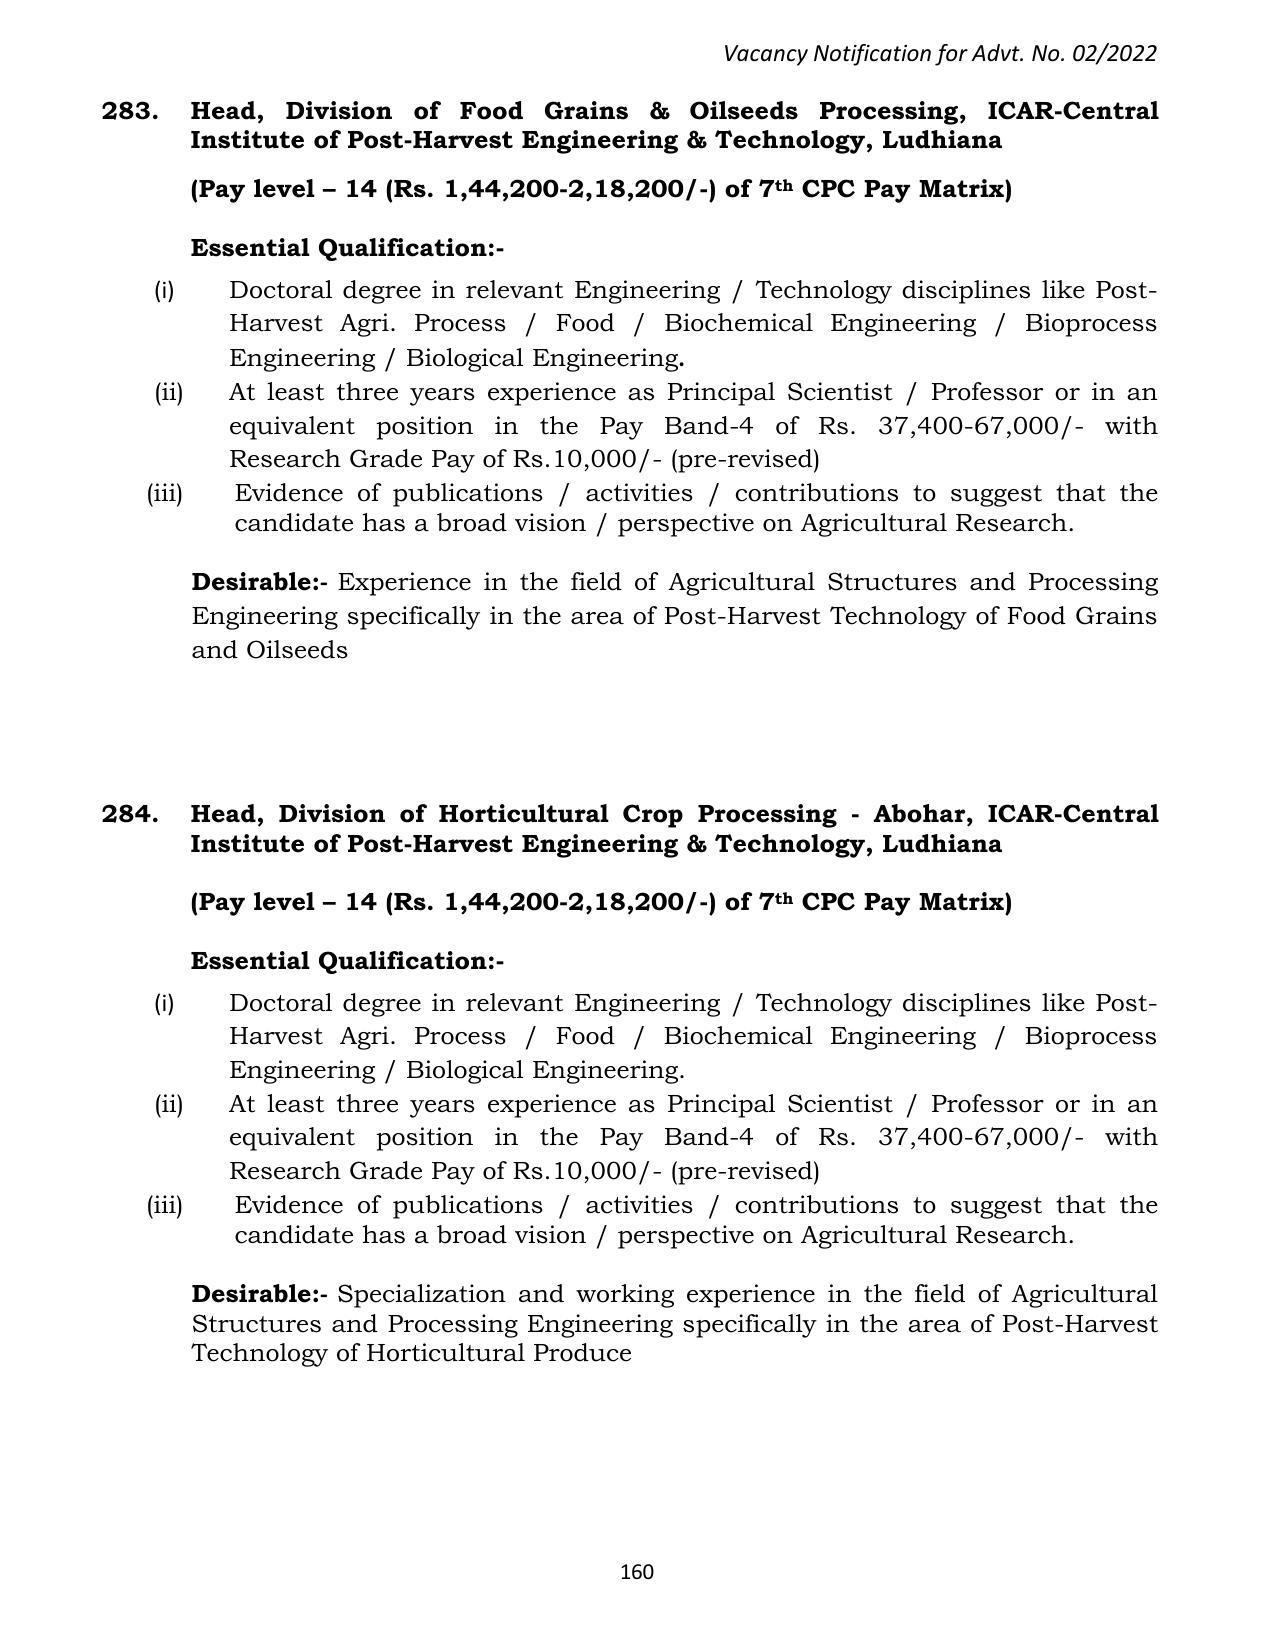 ASRB Non-Research Management Recruitment 2022 - Page 7